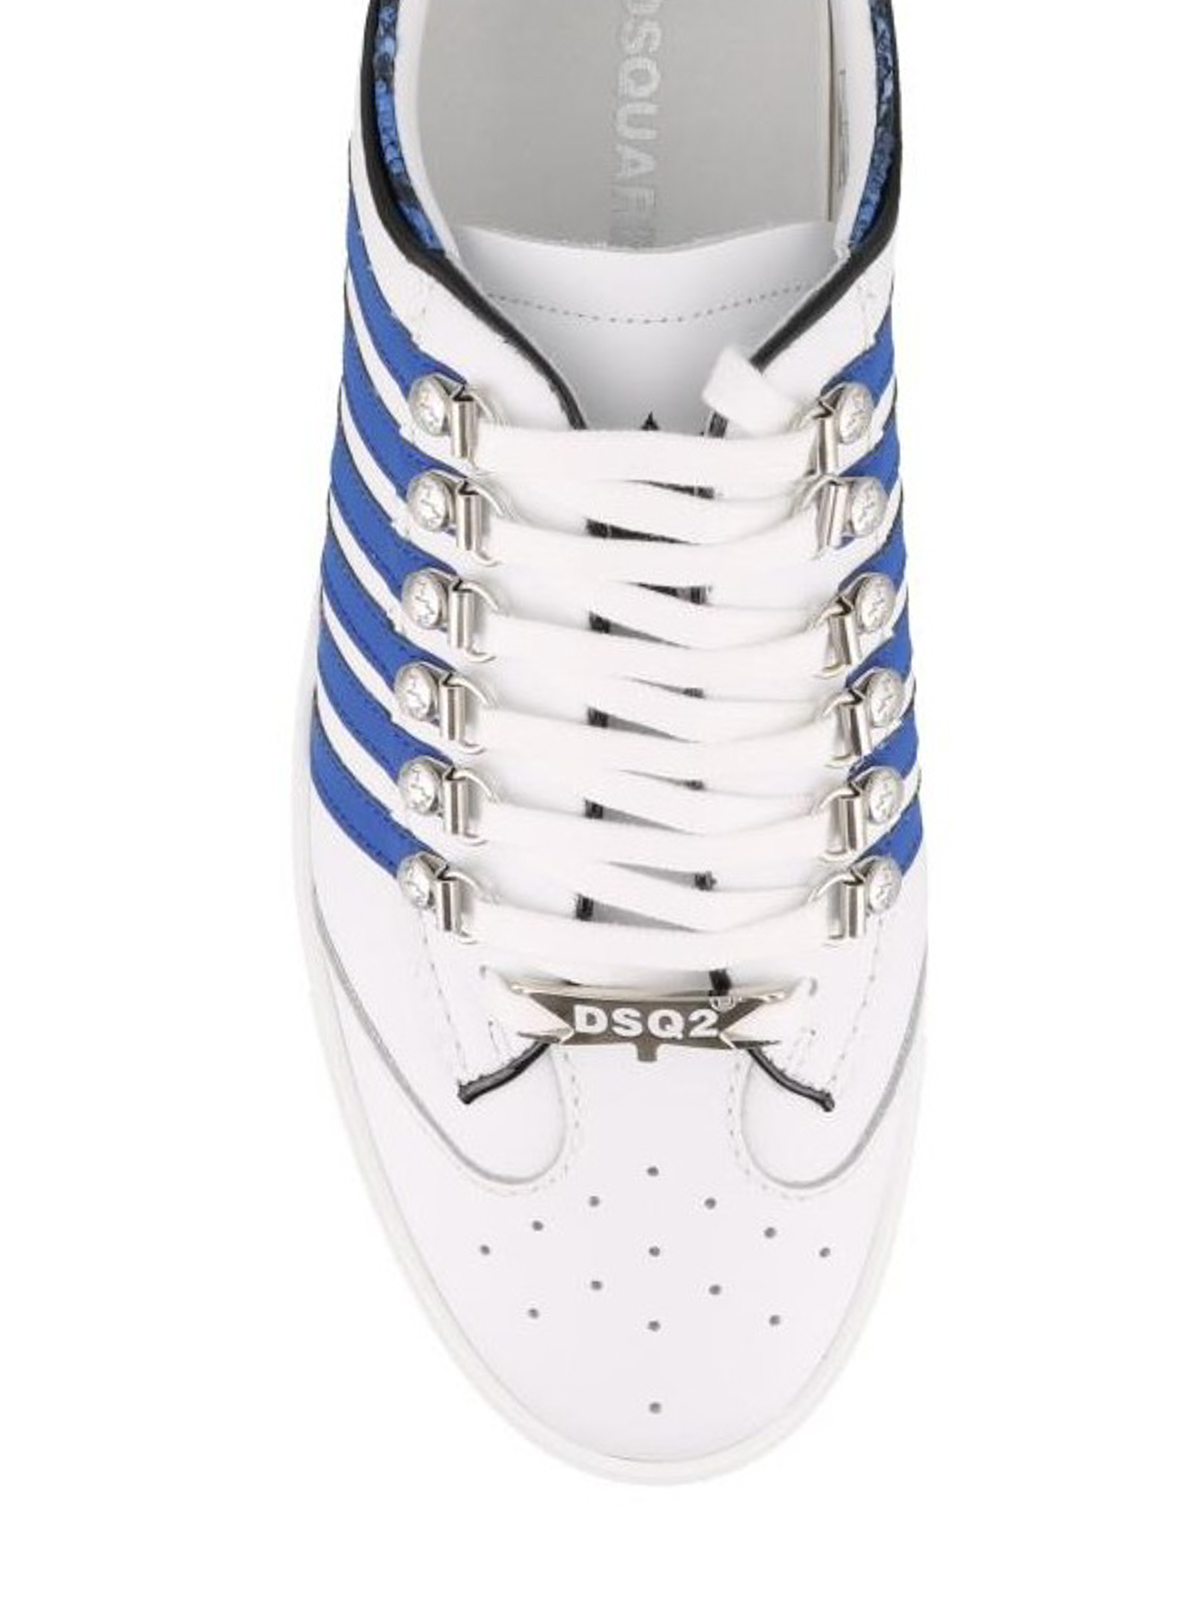 dsquared trainers sale